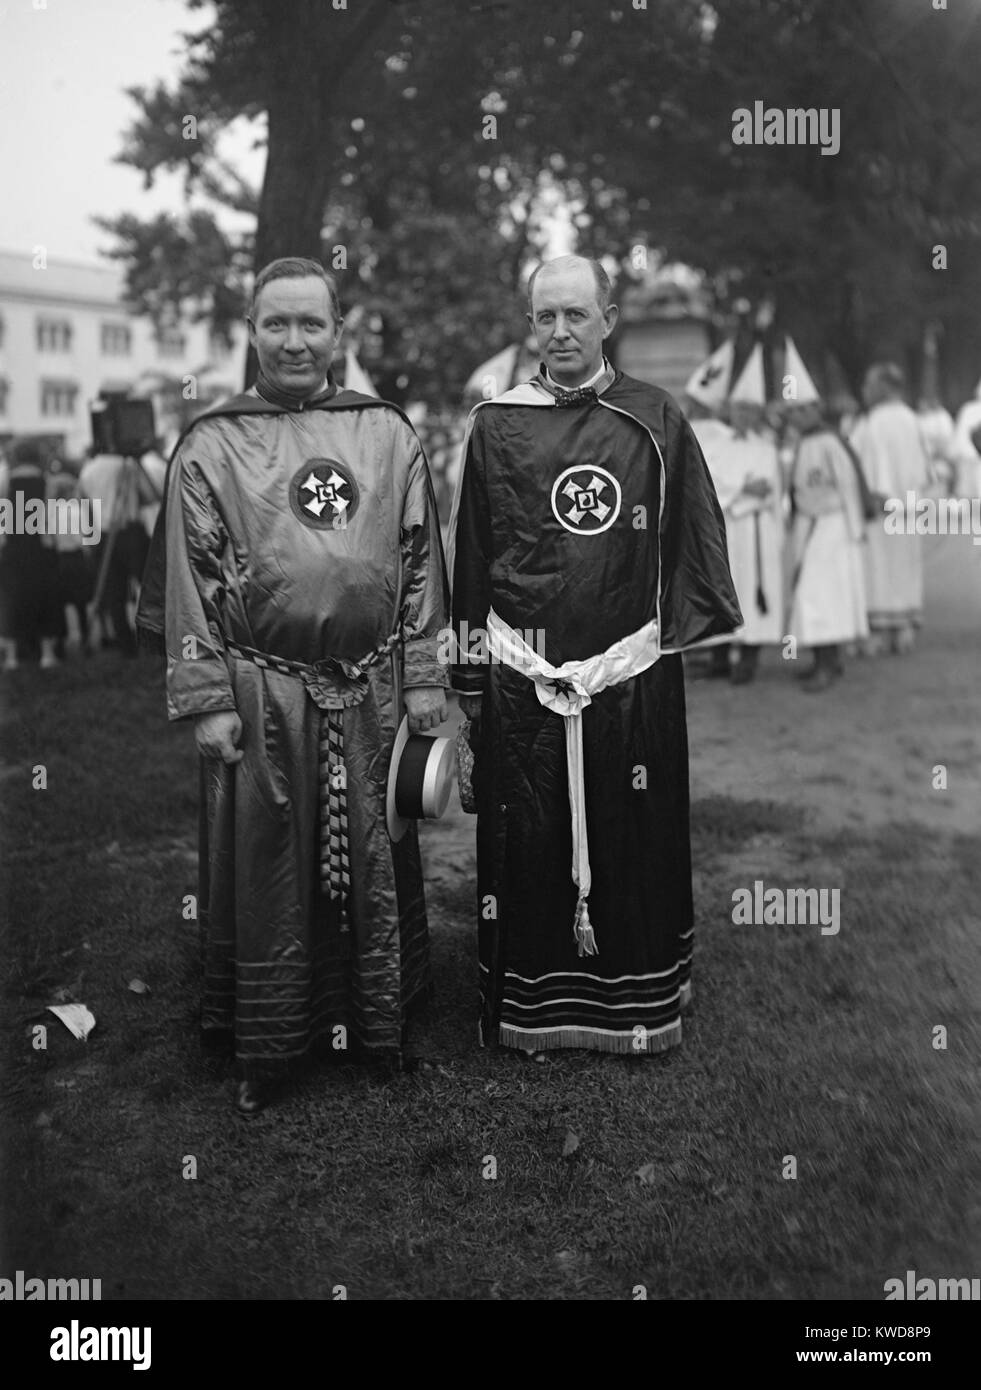 Hiram W. Evans, Grand Wizard of the Ku Klux Klan, with Kansas Grand Dragon Charles H. McBrayer. August 8, 1925. They lead a march along Pennsylvania Avenue and the National Mall in which an estimated 25,000 to 35,000 Klansmen participated. Their robes bear the 'MIOAK', an acronym for 'Mystic Insignia of a Klansman.' It is commonly called 'the Blood Drop Cross'. (BSLOC 2015 16 170) Stock Photo